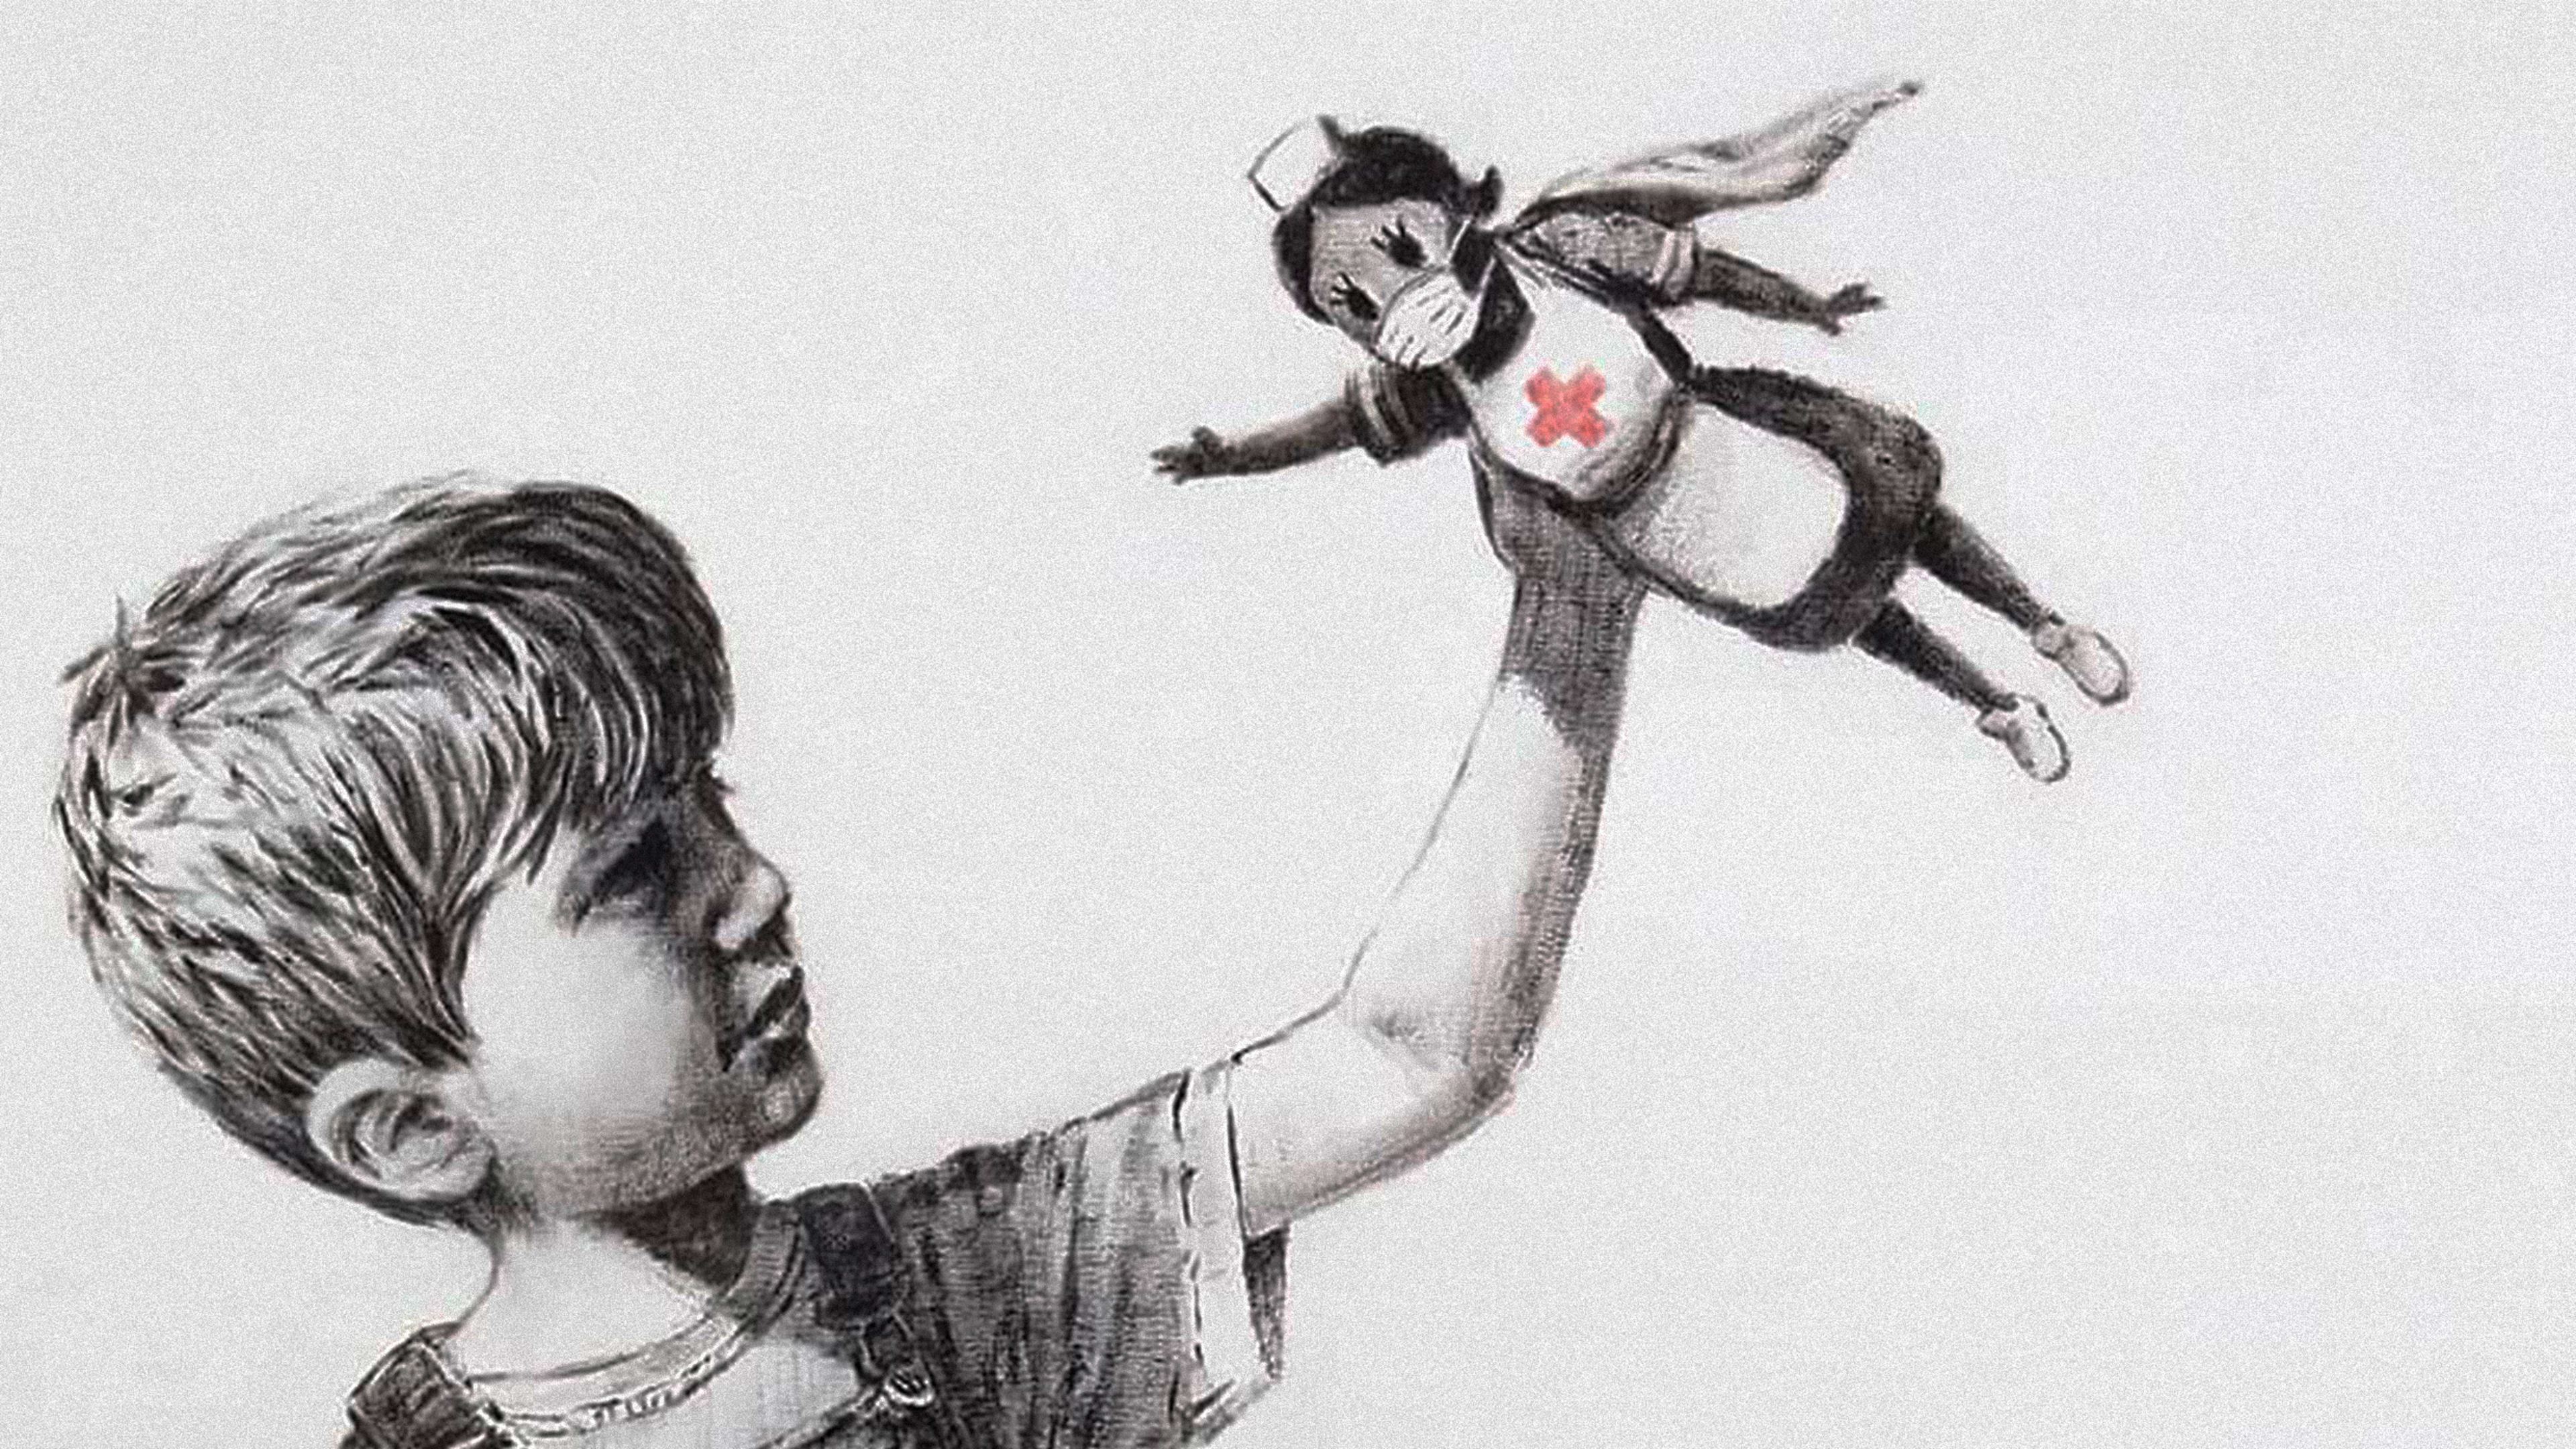 New Banksy painting celebrates healthcare workers as the real superheroes